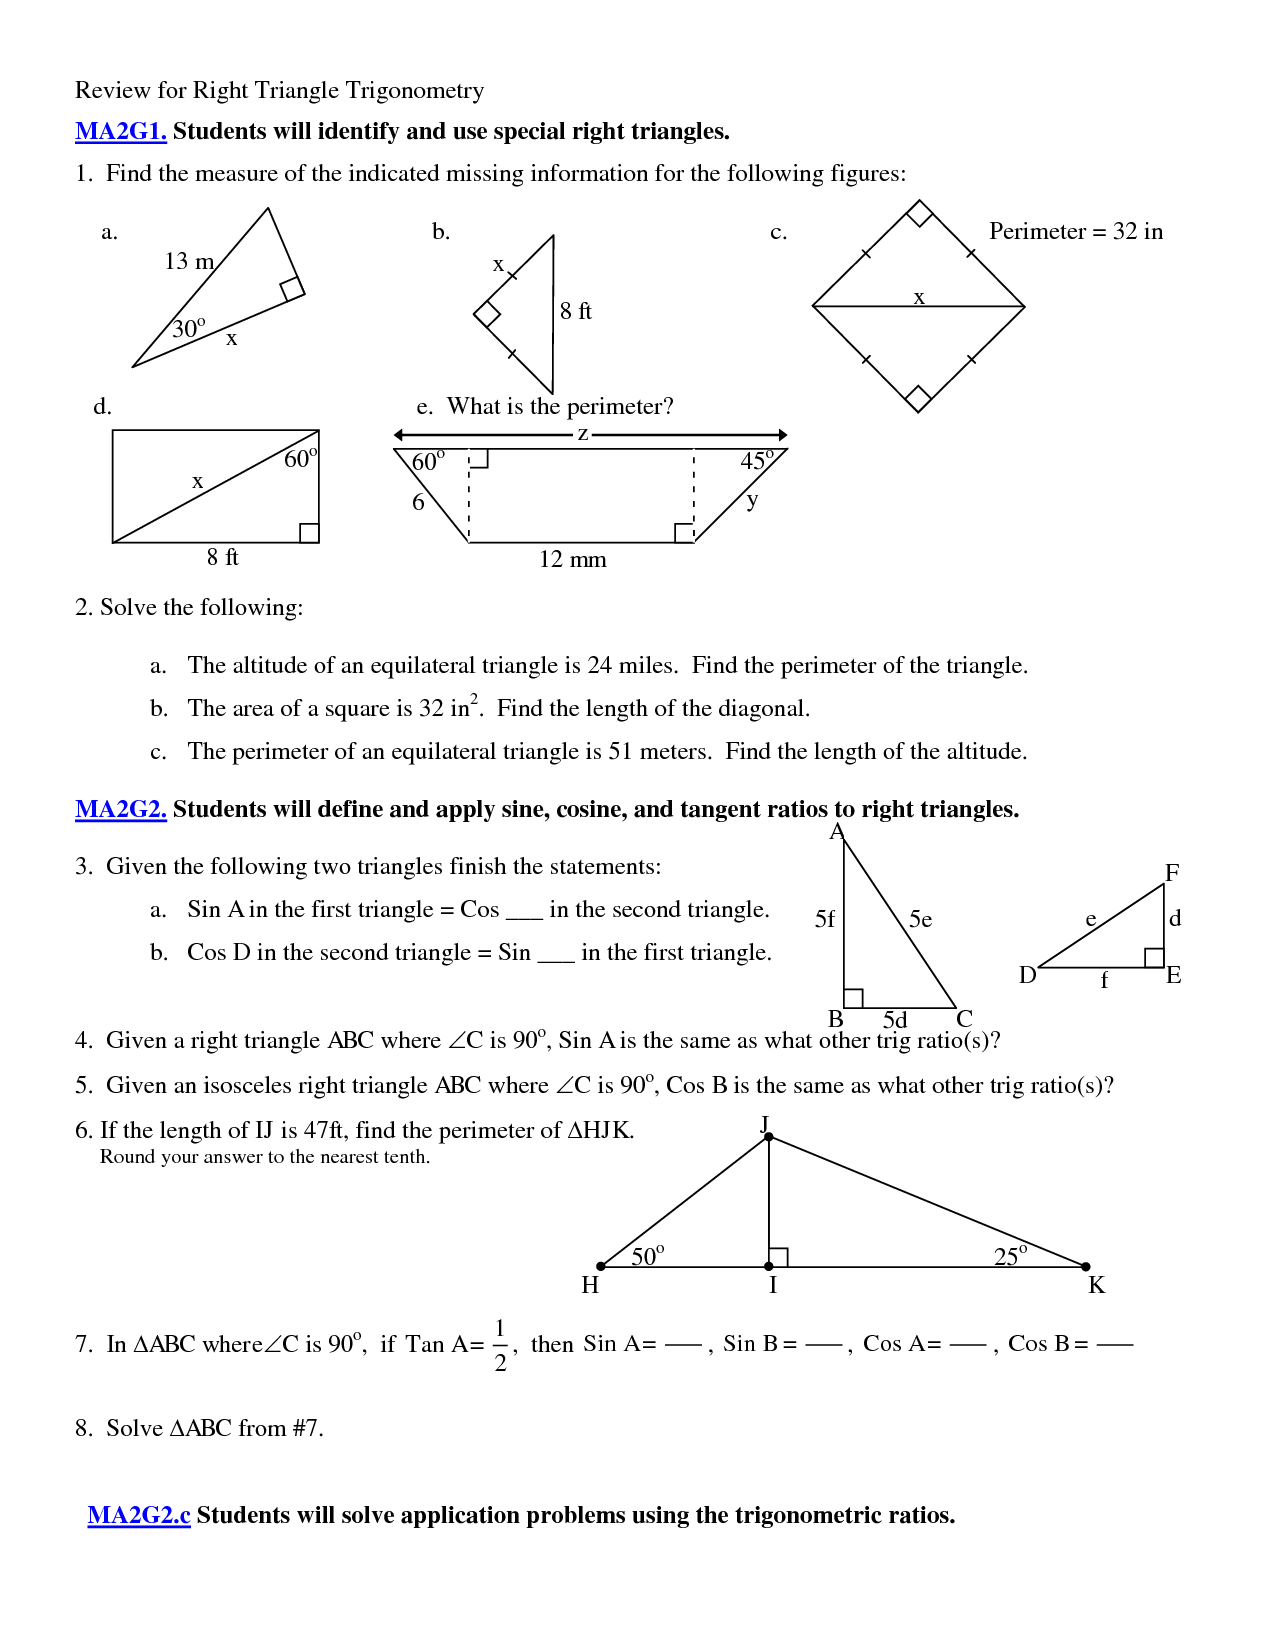 Special Right Triangles Worksheet